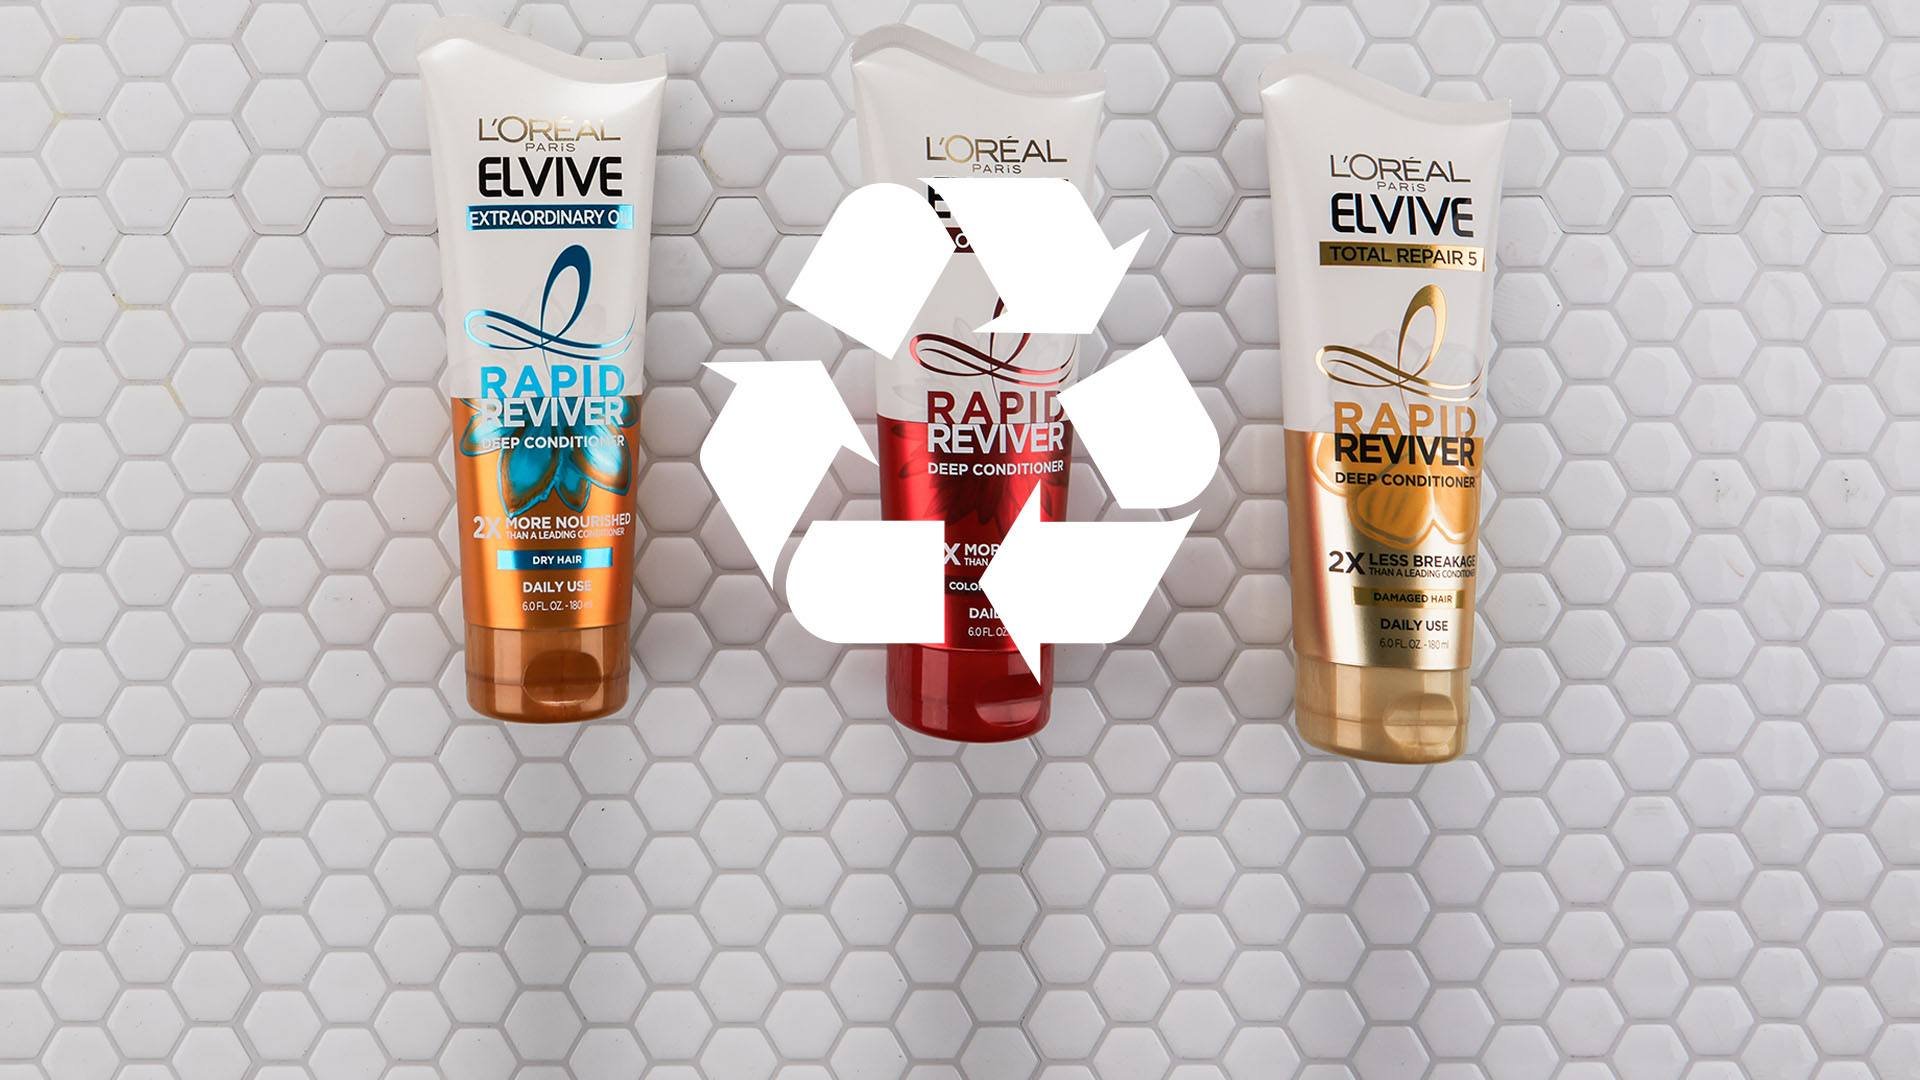 Loreal Paris Article How To Reuse And Recycle Beauty Products And Makeup D